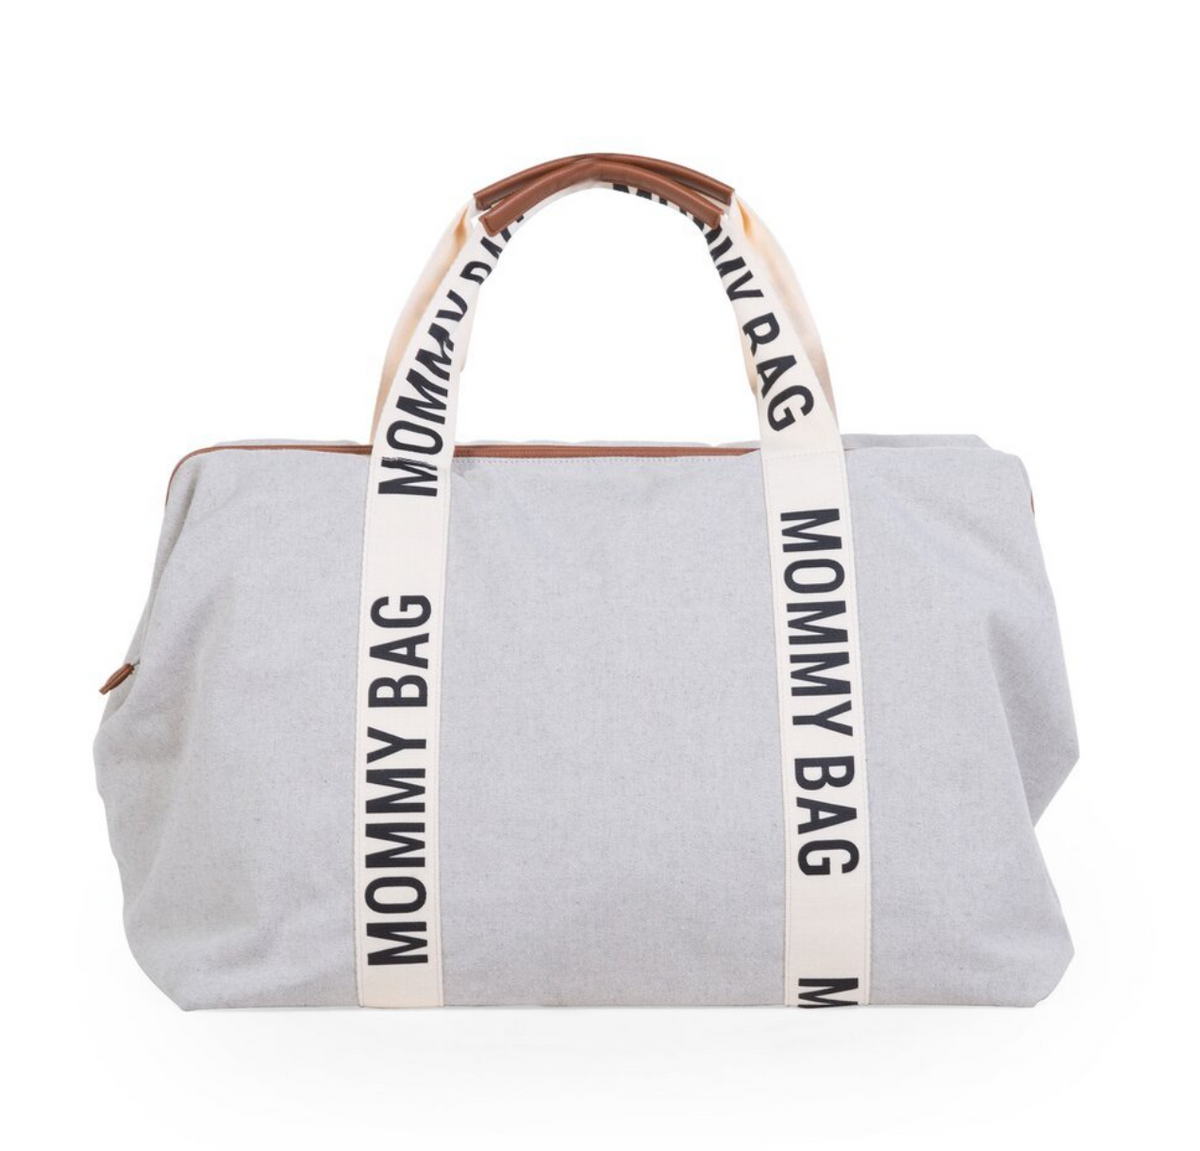 Caramel and Sun, Mommy Bag Big Grey Off White